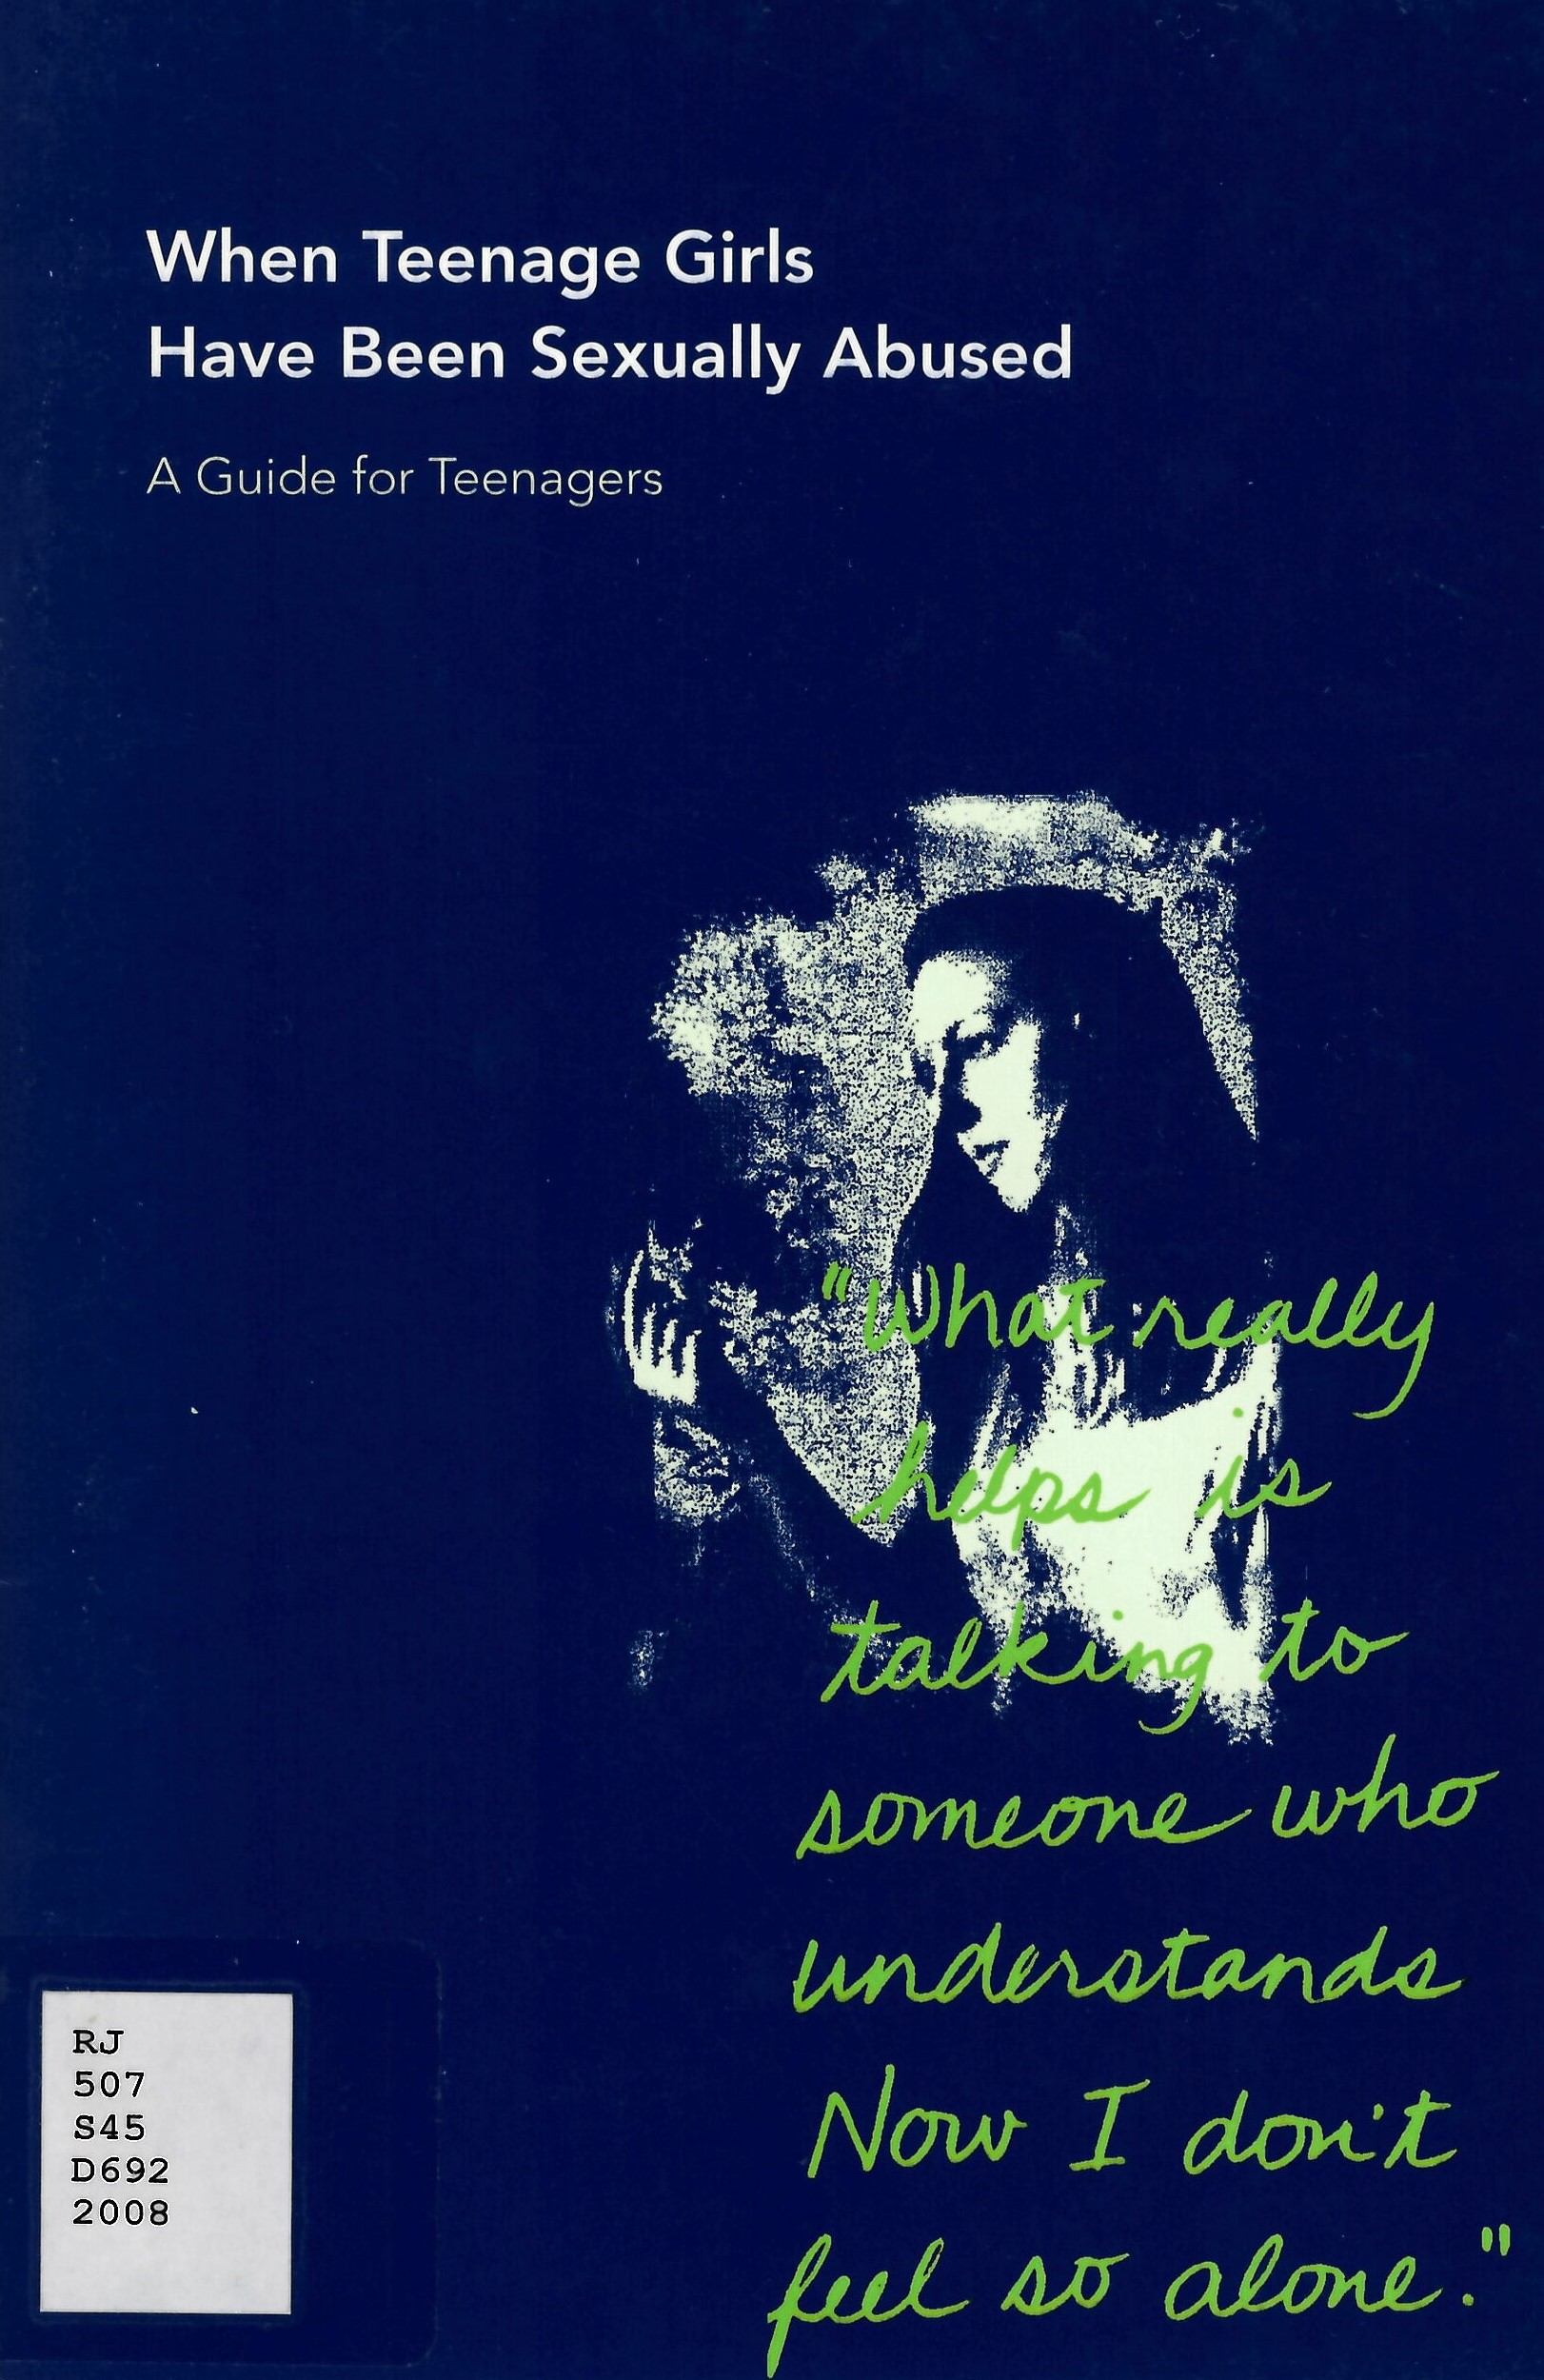 When teenage girls have been sexually abused: a guide for teenagers.